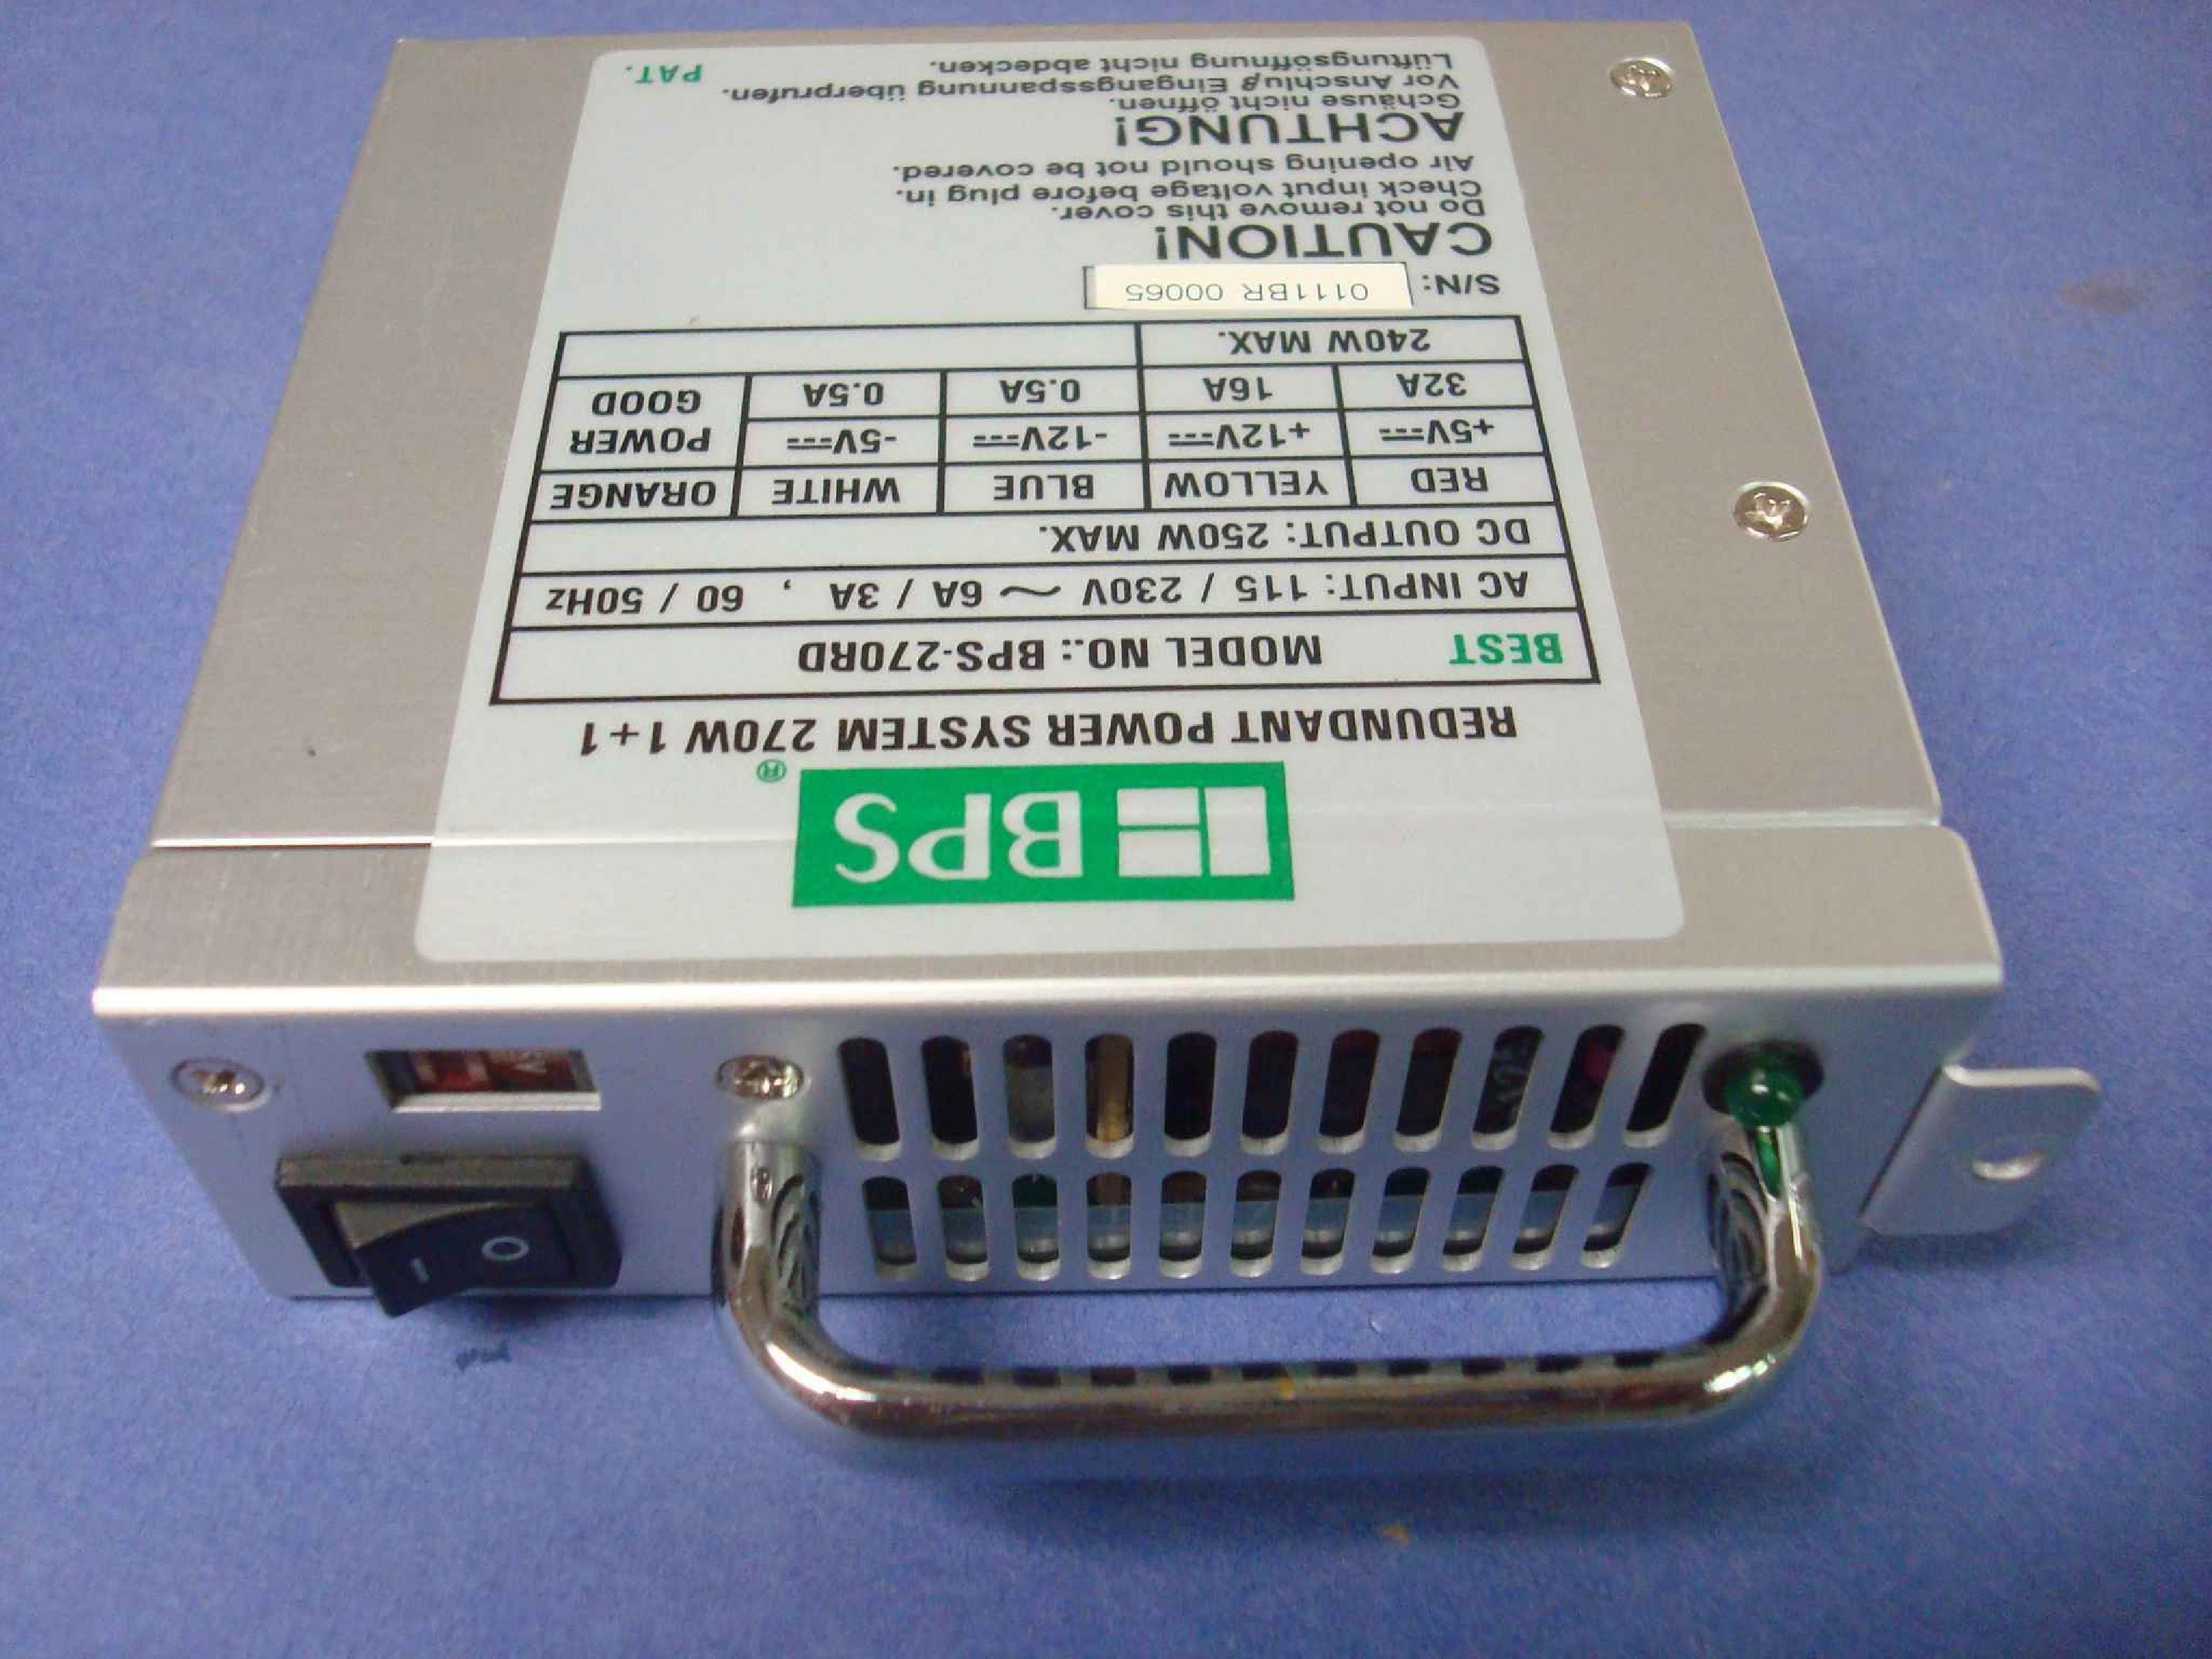 BPS PSA250DX-BP REDUNDANT POWER SUPPLY WITH TWO HOT SWAP MODULES